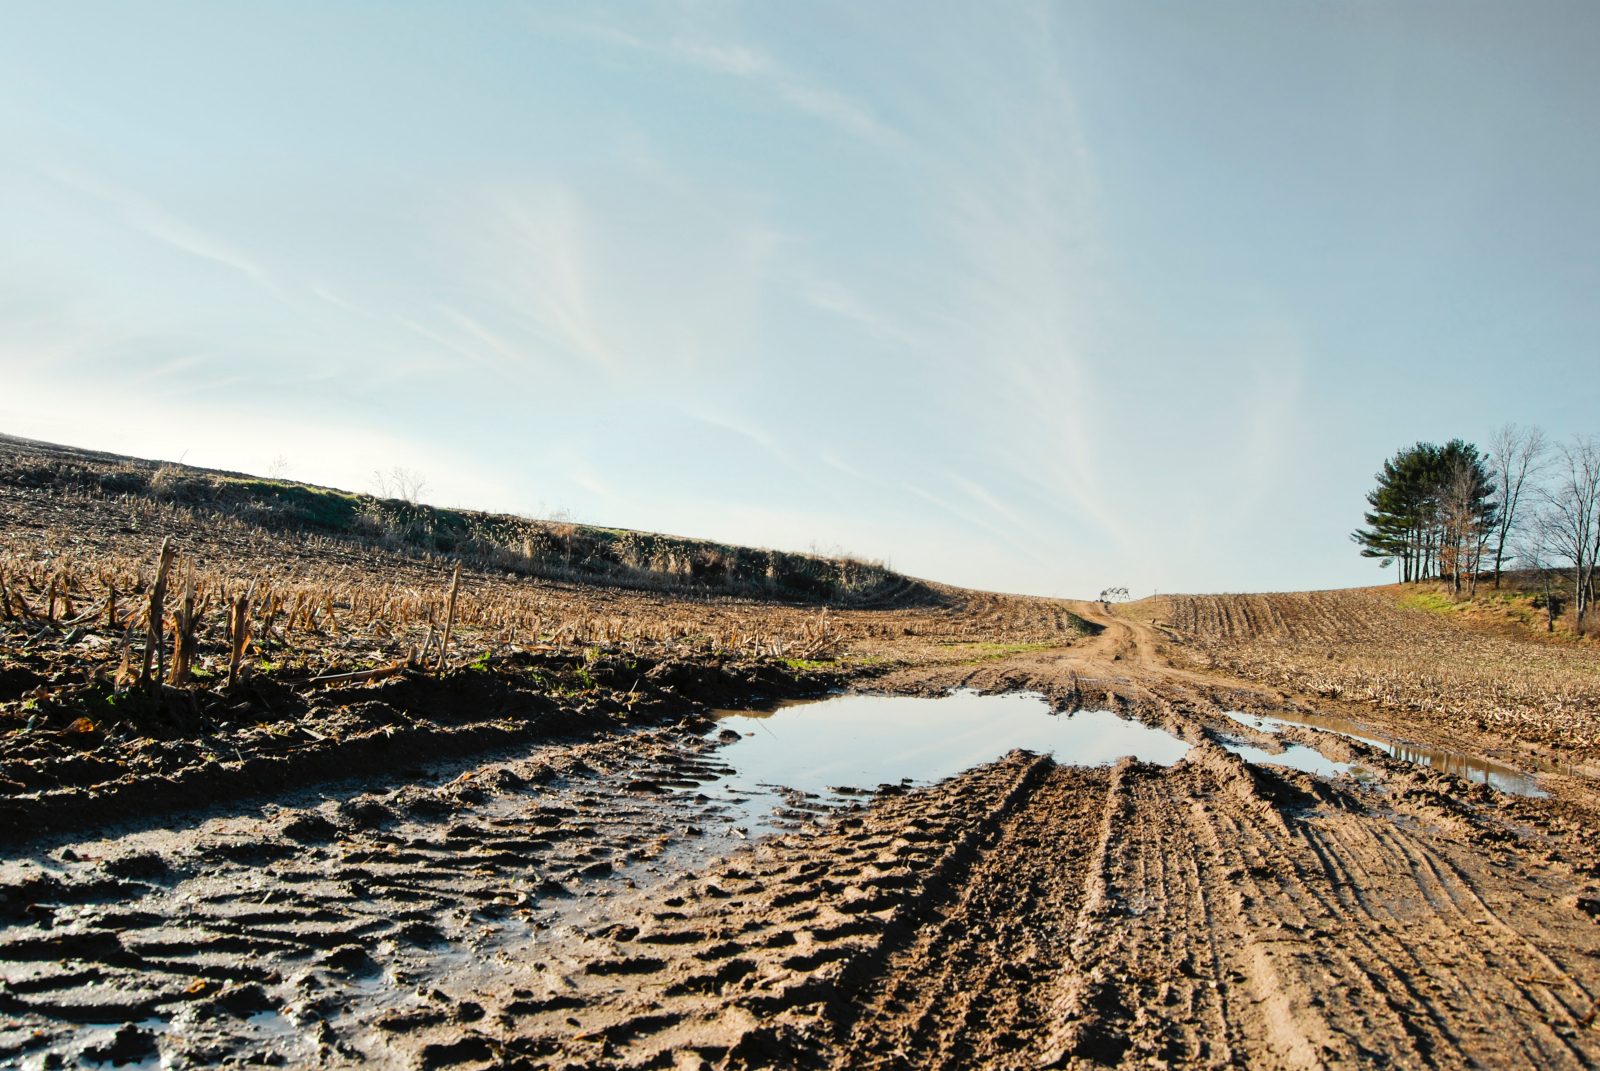 A muddy, brown field is seen with tire marks and puddles of water. Small corn stalks are coming out of the ground to the left of the puddle, with trees set off to the right side of the field.